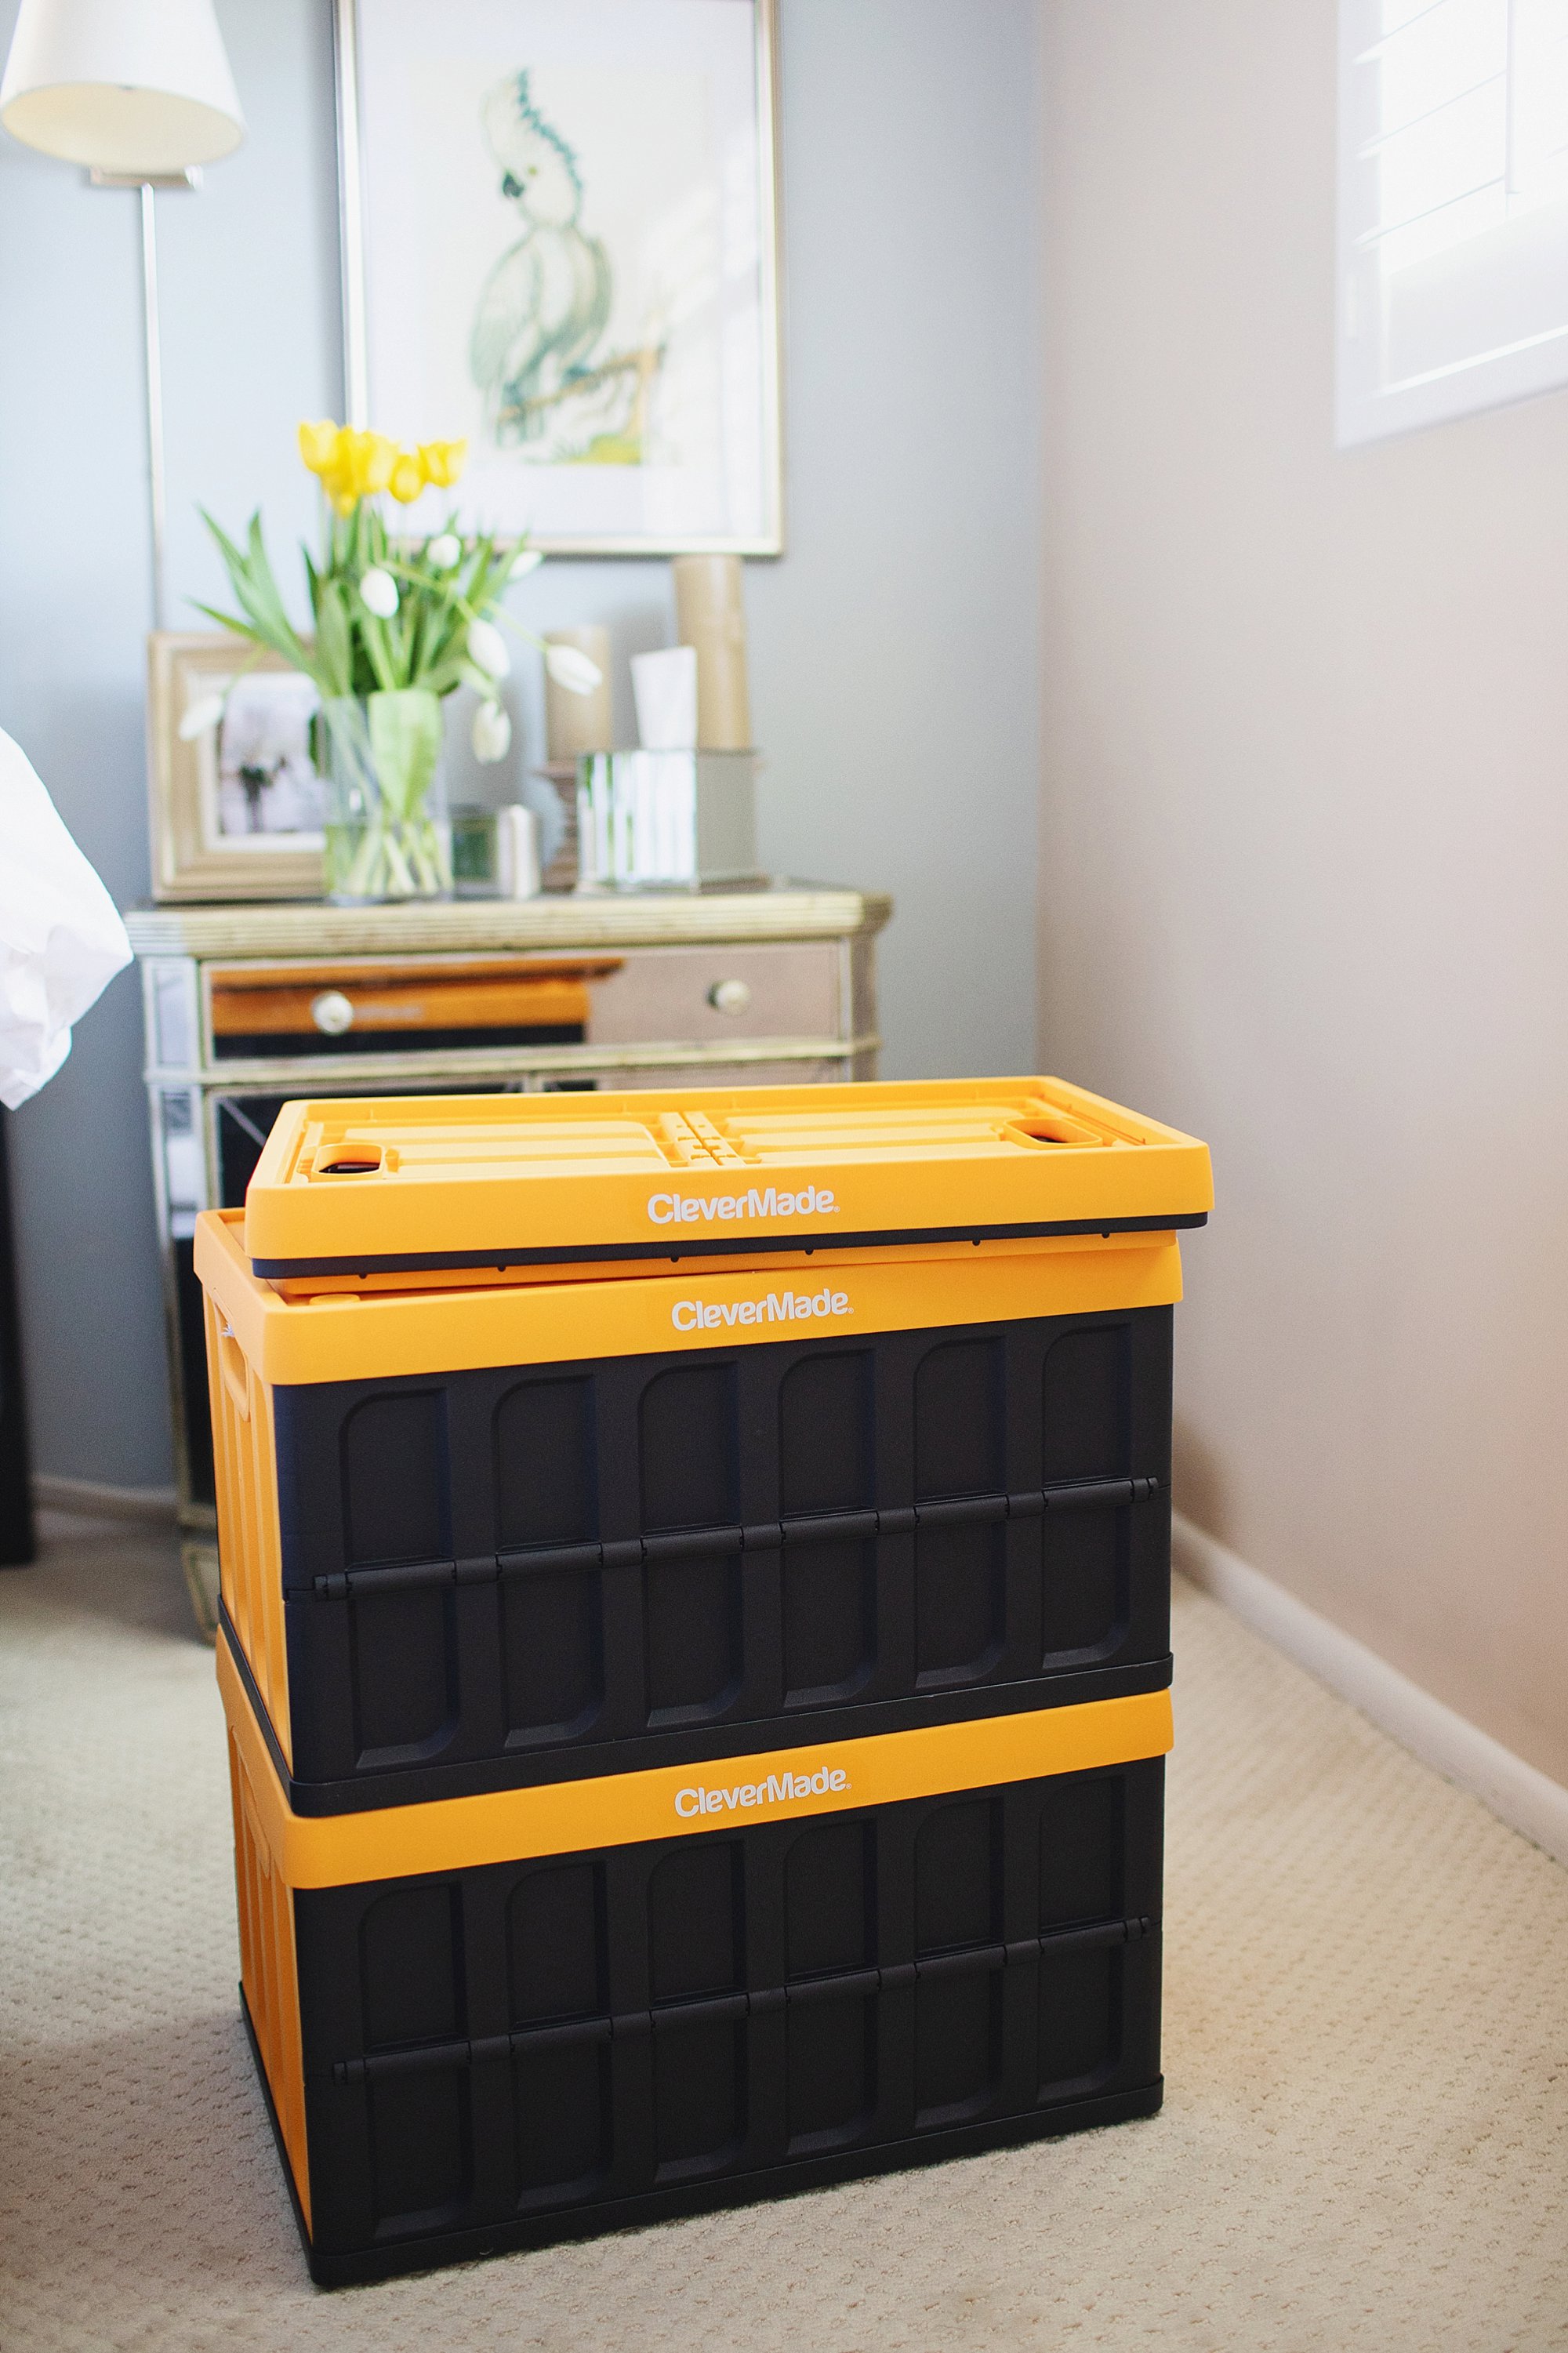 Collapsible crate tote by CleverMade with lids! Great for storage when not in use and these are my favorite plastic crates ever! See how I use them on the blog